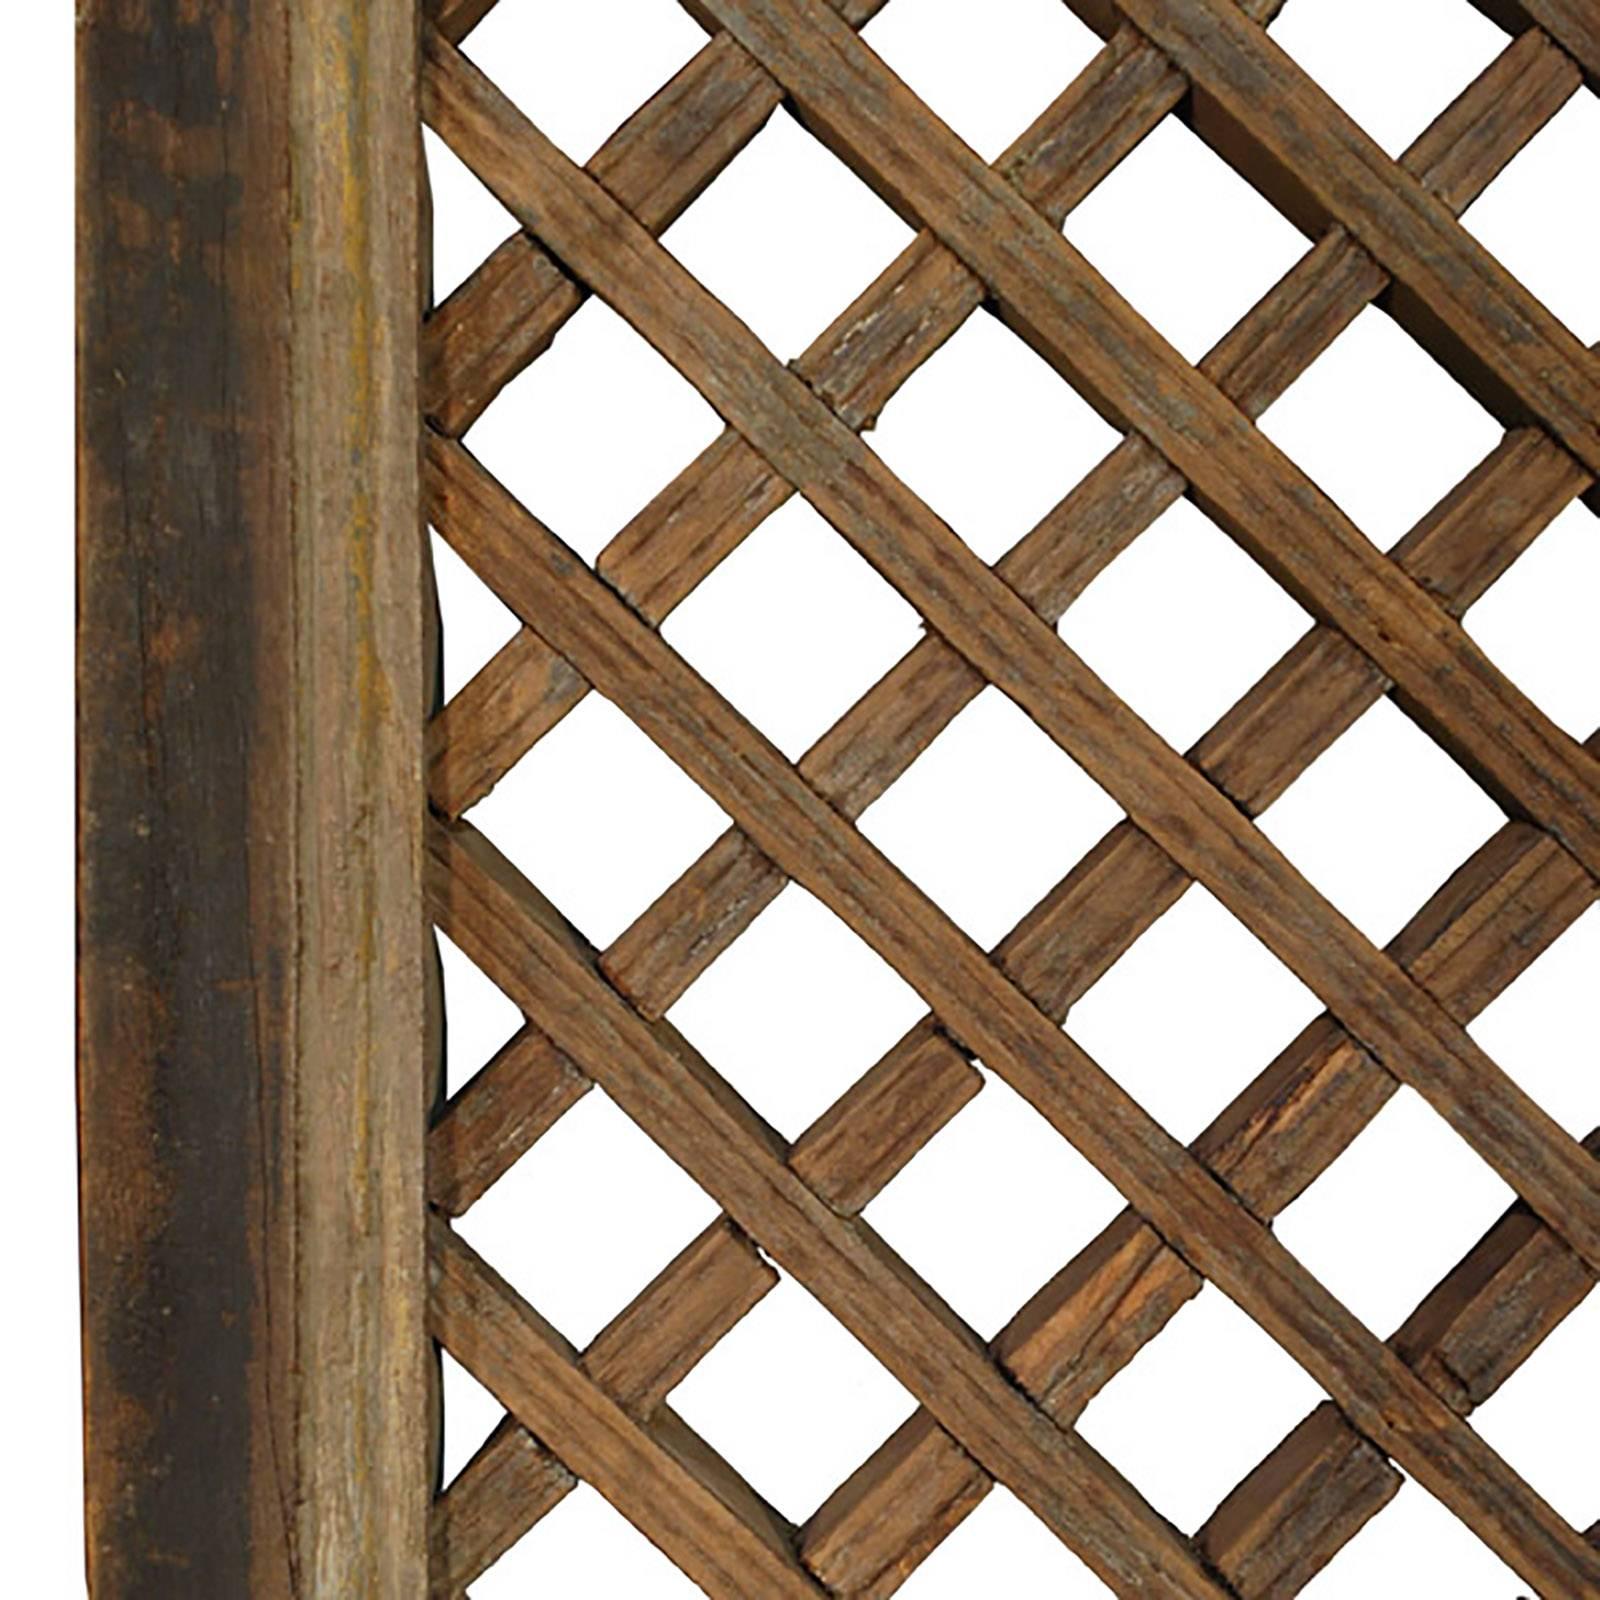 Elegant in its simplicity this 19th-century lattice window panel was designed to allow light and air in while providing a degree of privacy. Different from carving or perforating wood, the art of making a lattice was an exacting craft. Requiring